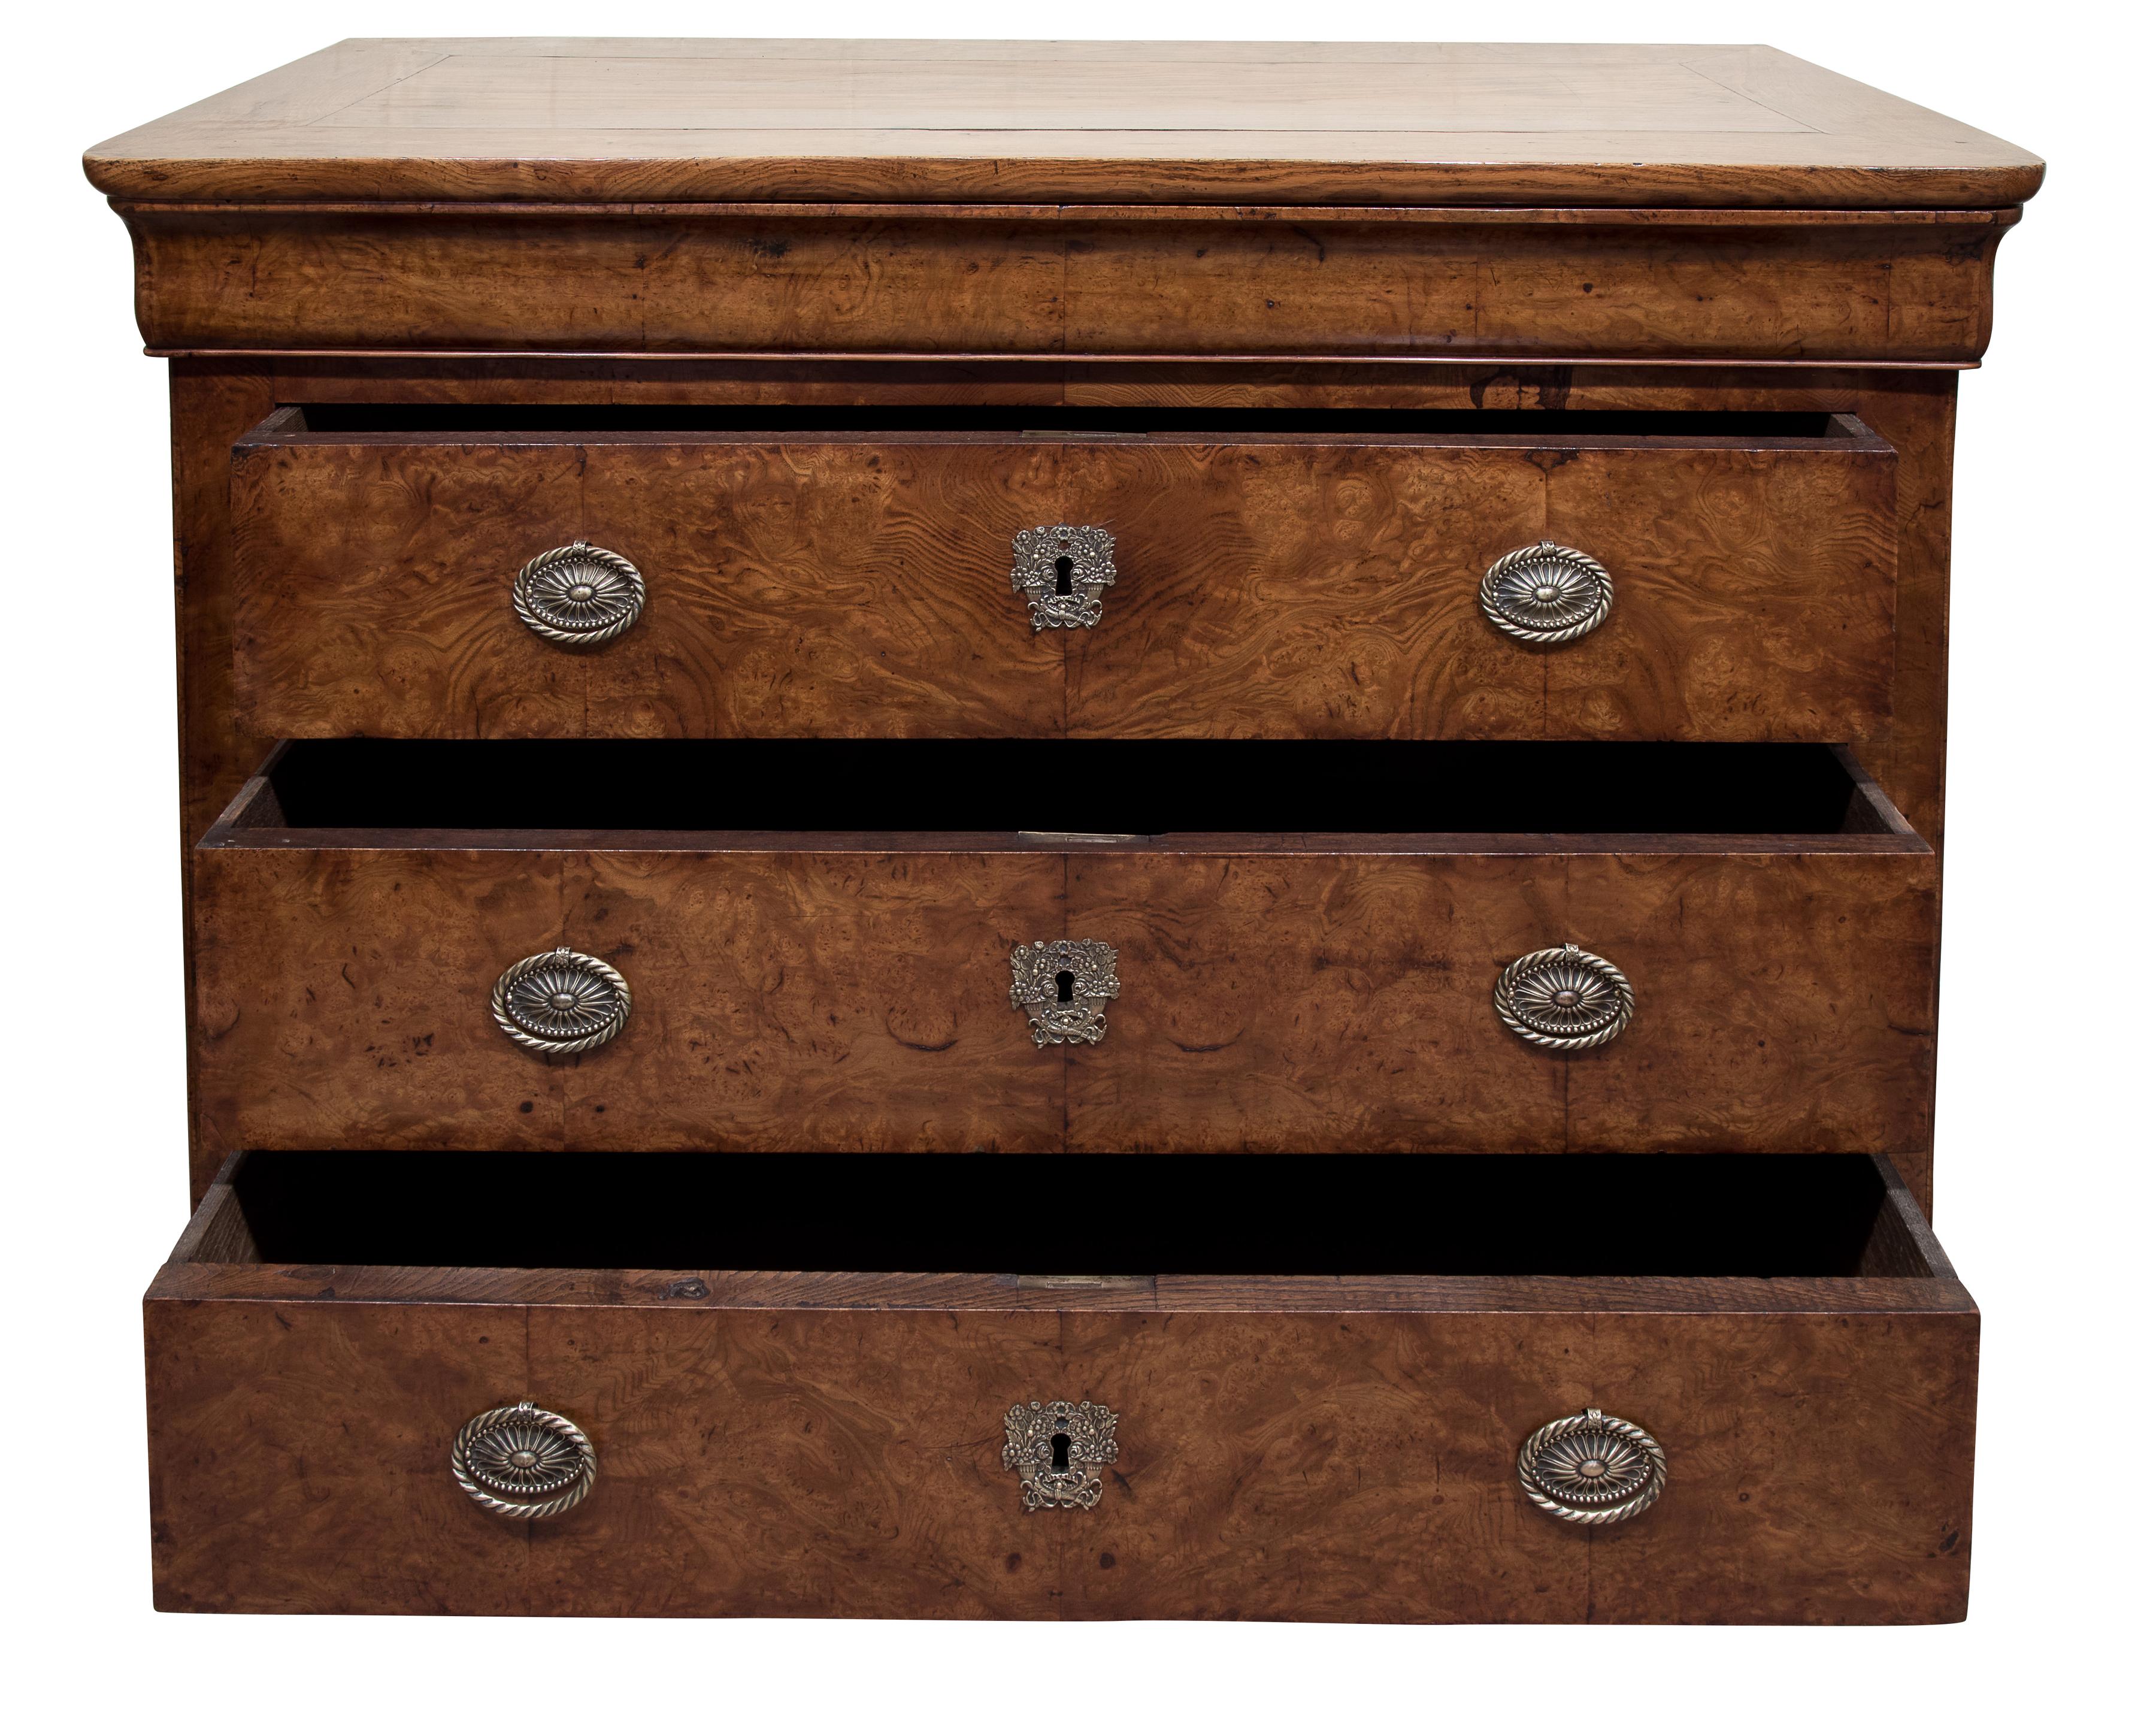 A fine mid-19th century French figured elm commode of superb color, with 3 long drawers below a frieze drawer,

circa 1850.